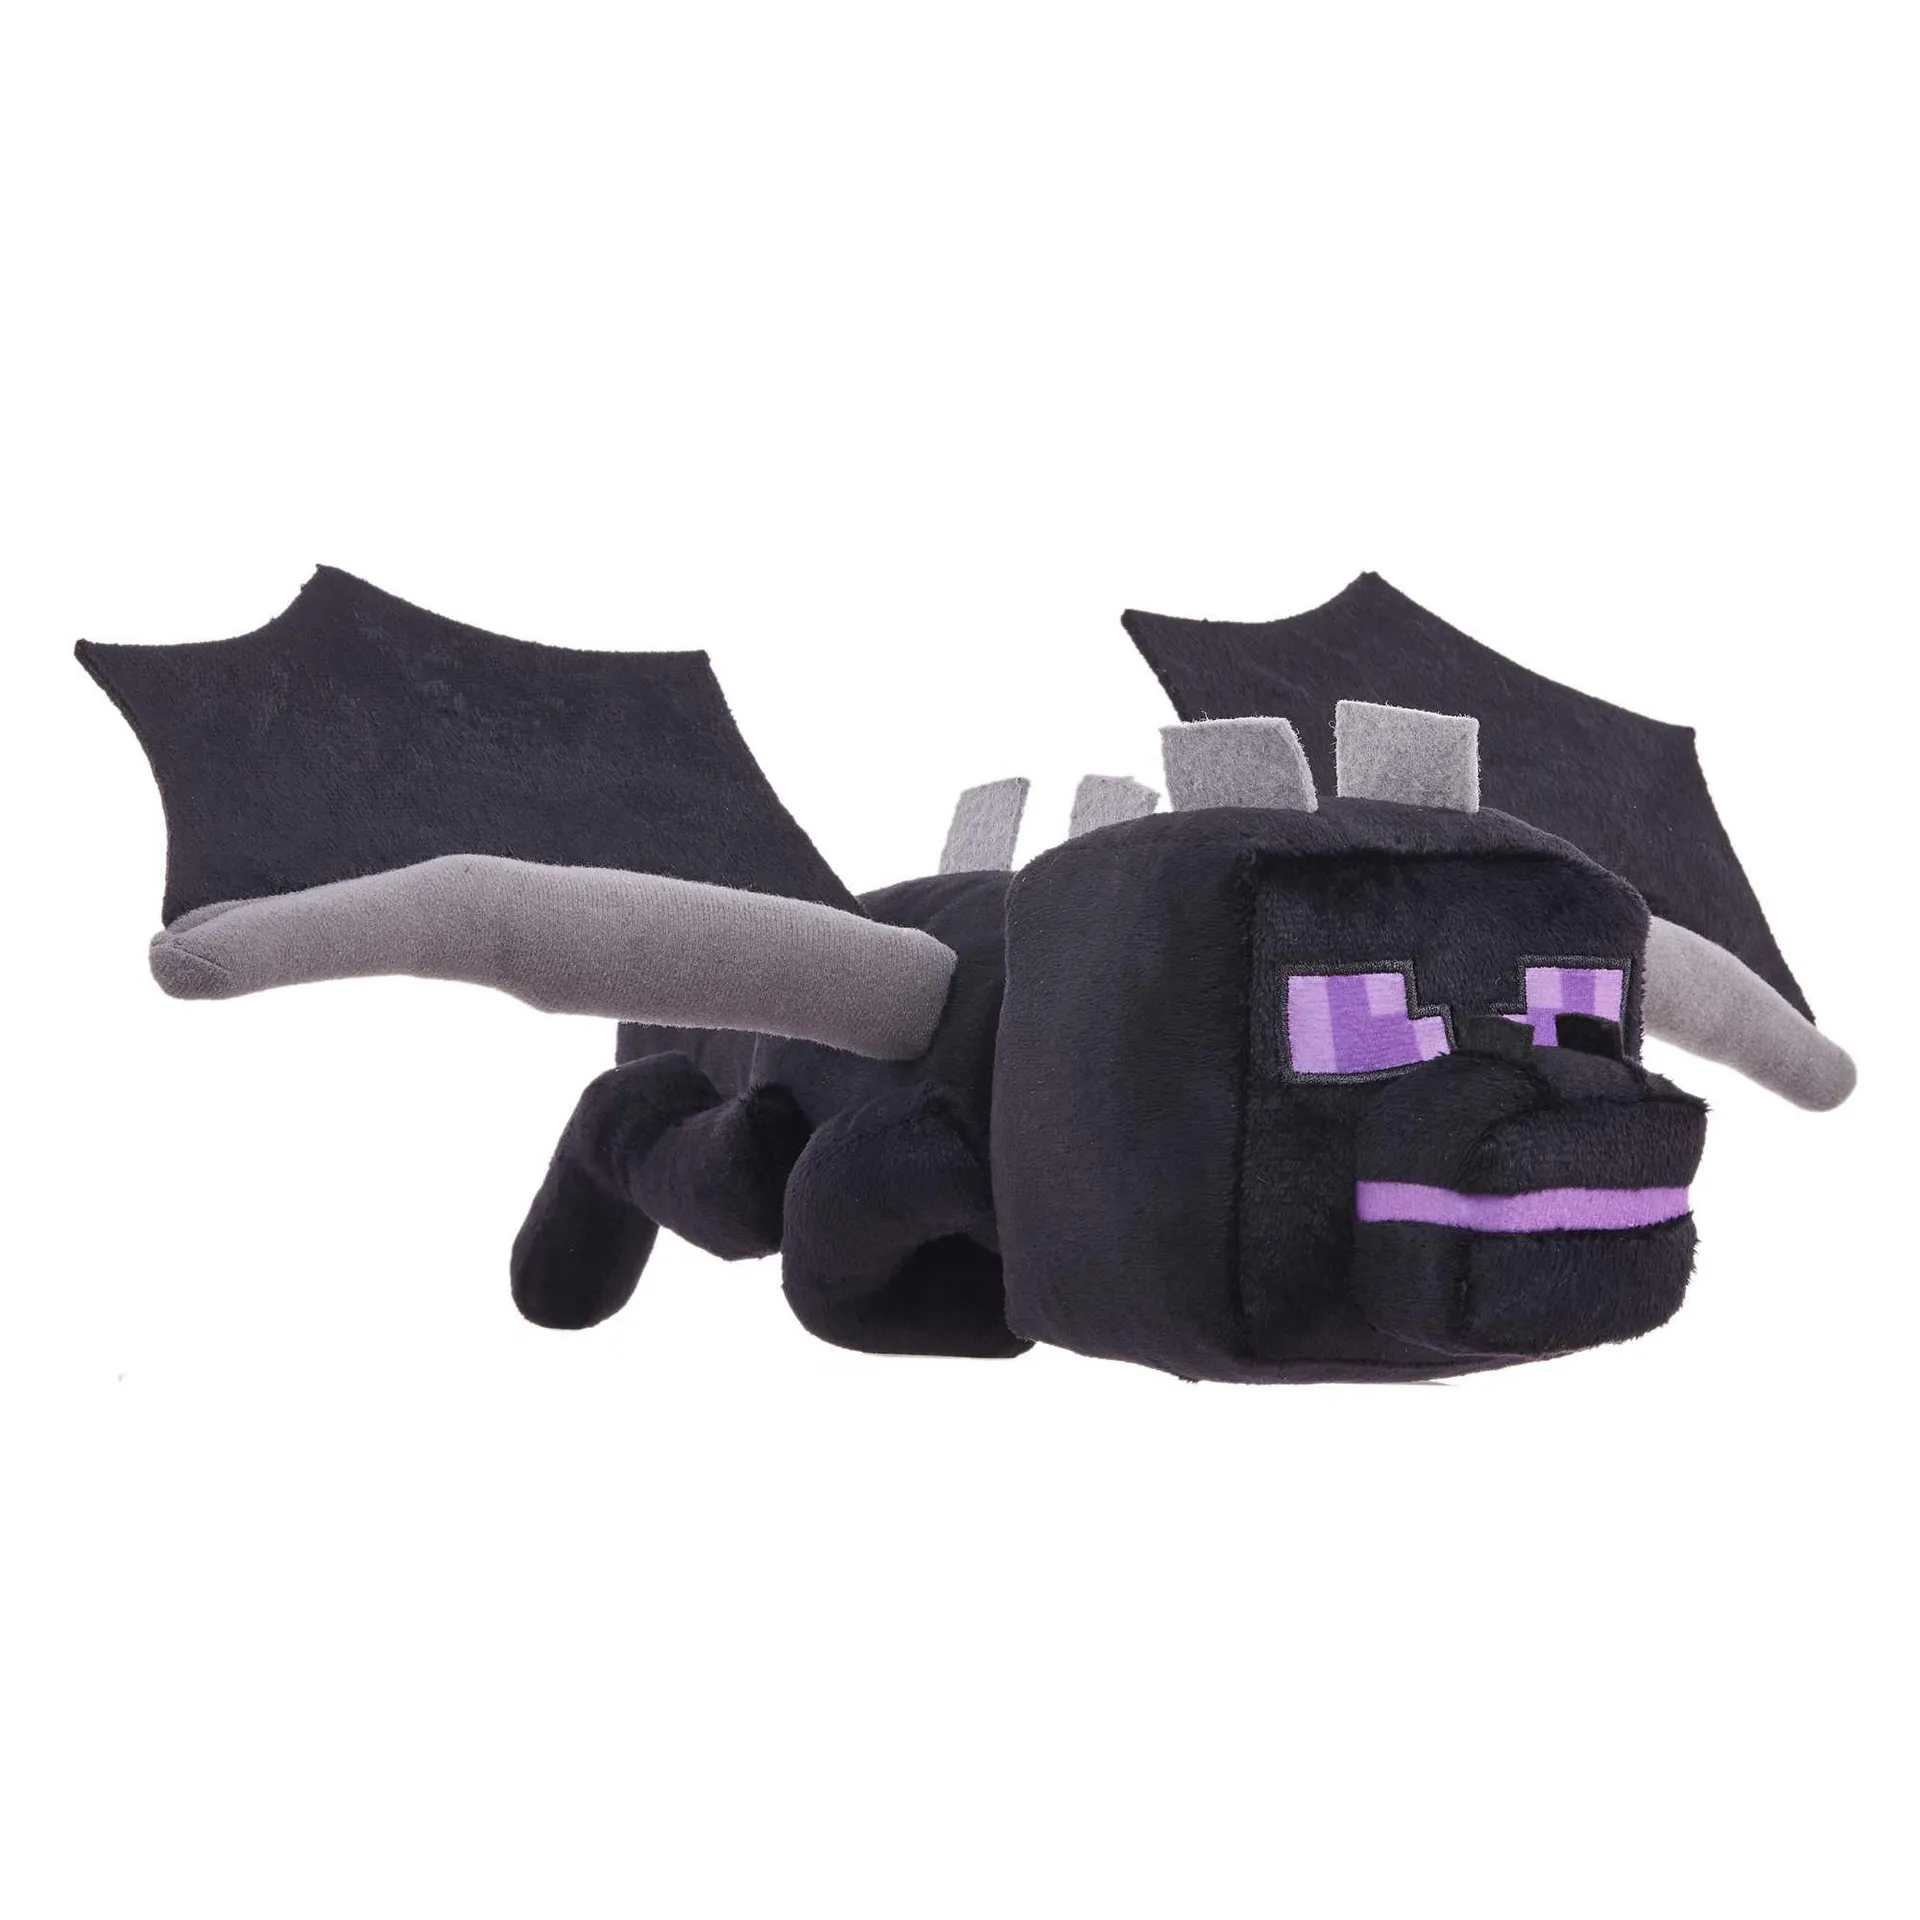 Minecraft Ender Dragon Plush Figure, Stuffed Animal With Lights And Sounds